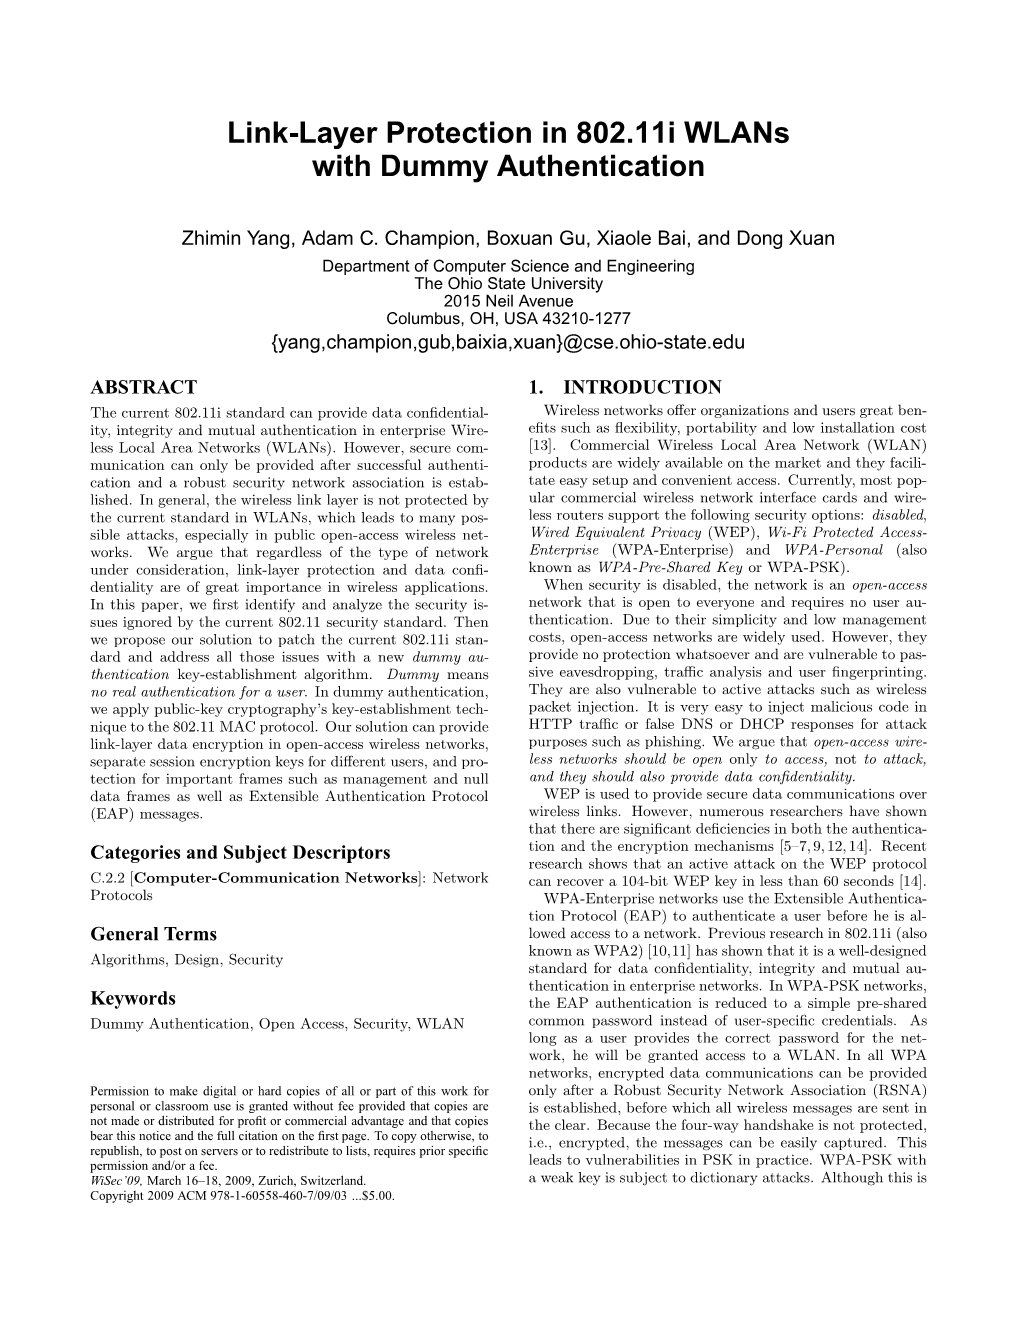 Link-Layer Protection in 802.11I Wlans with Dummy Authentication